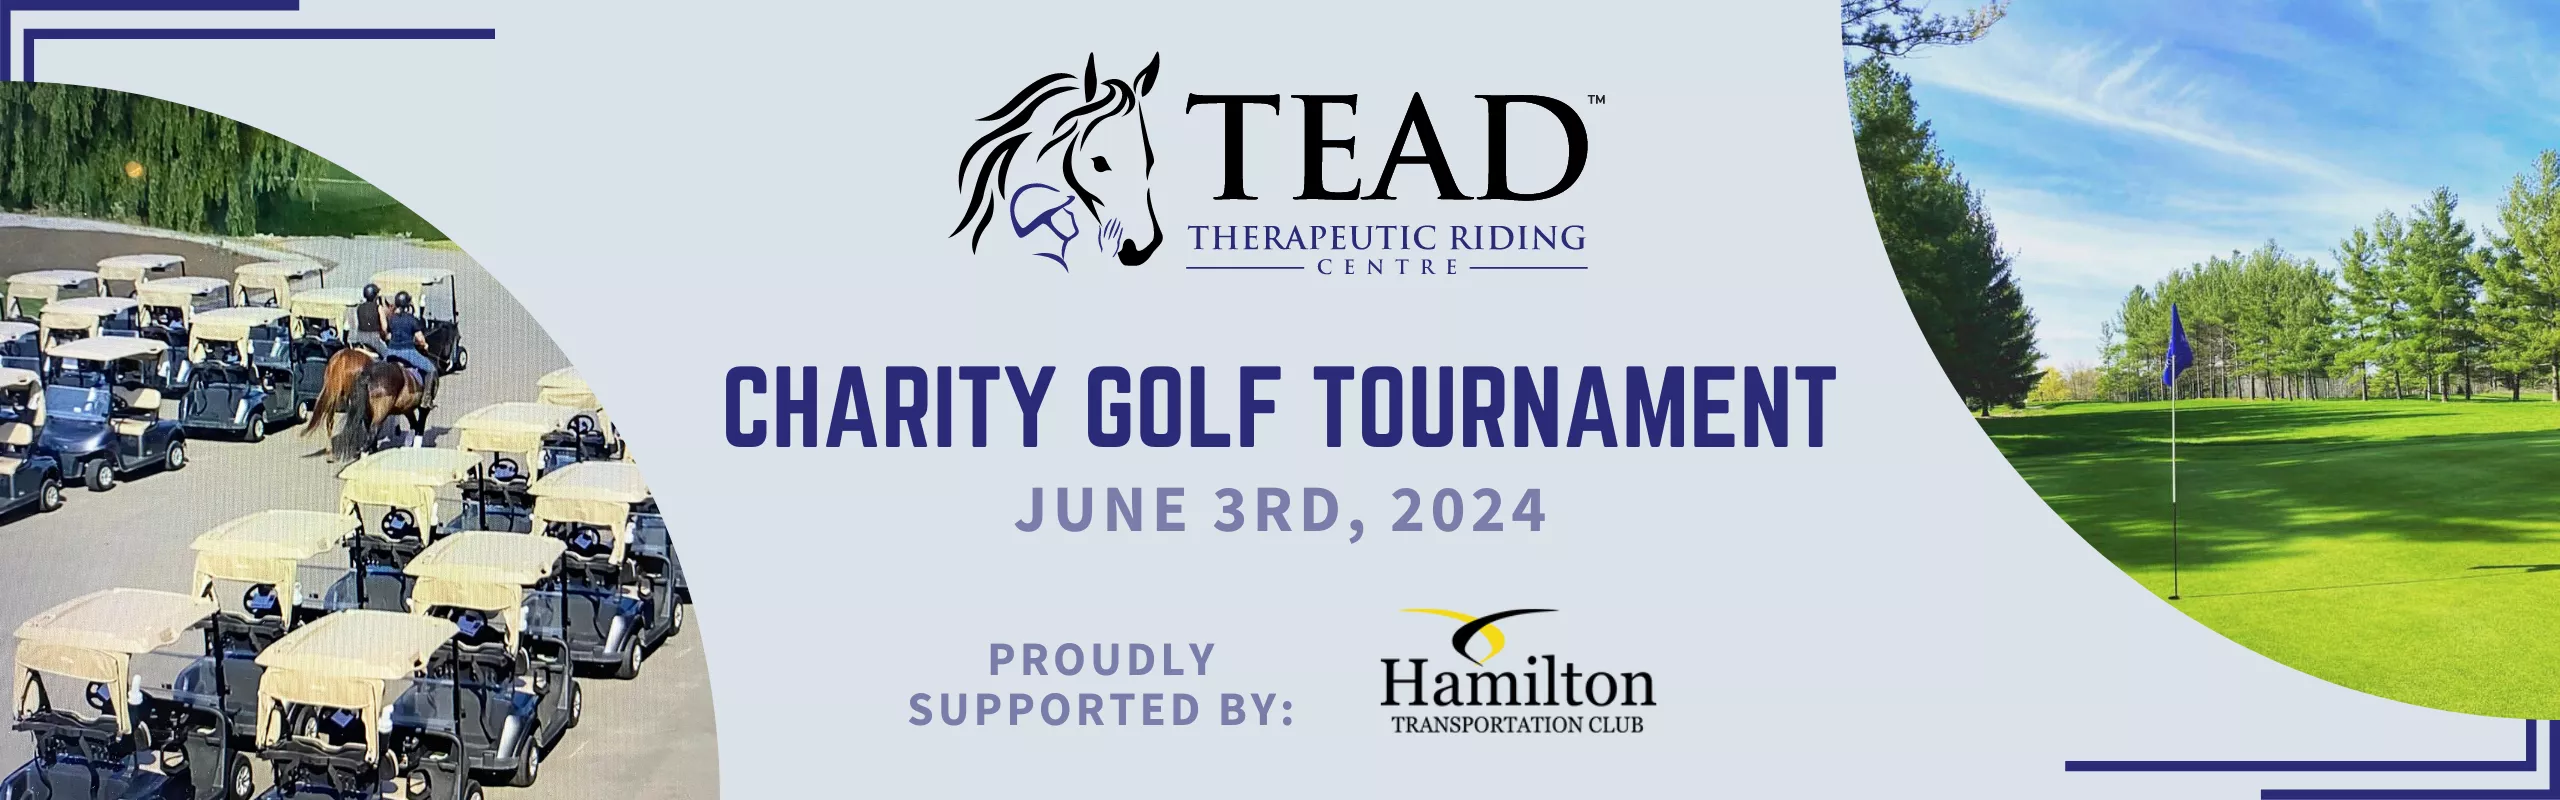 Charity golf tournament for TEAD, a beautiful golf course on a sunny day and two people on horseback riding through lines of parked golf carts. 